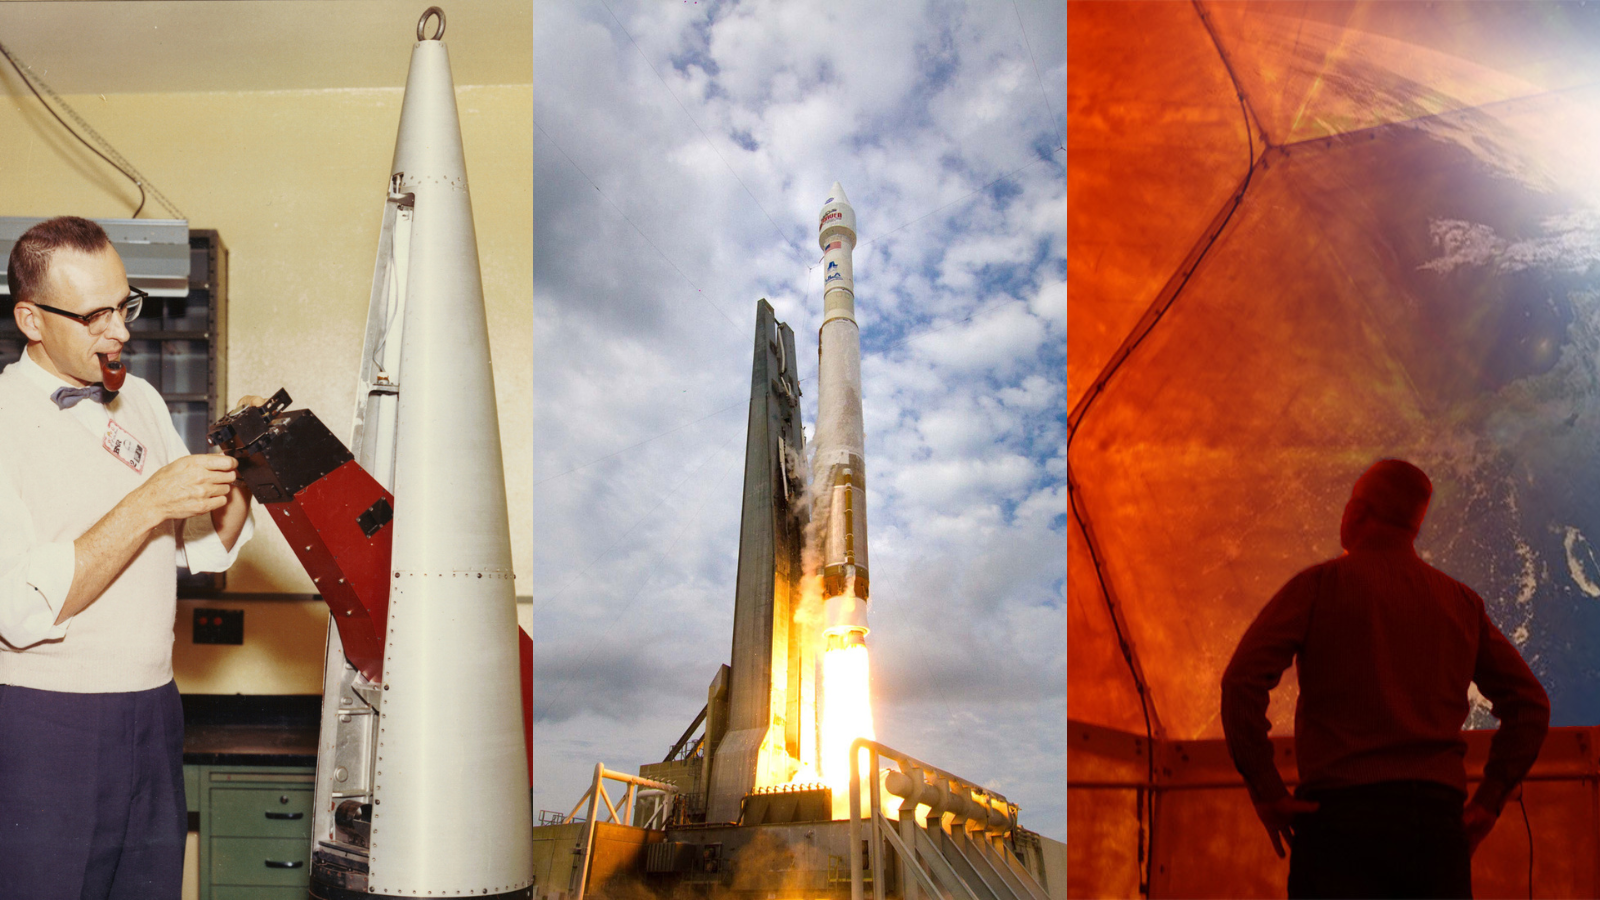 A banner of images celebrating LASP's 75th anniversary. From left to right: a historical photo of a main smoking a pipe working on space hardware in a lab; NASA's MAVEN rocket launching from Kennedy Space Center; and a person inside the radome, which hosts antenna on the roof of LASP's main building. Image credits: LASP/CU Boulder/ Casey Cass and LASP/CU Boulder Ryan Vachon